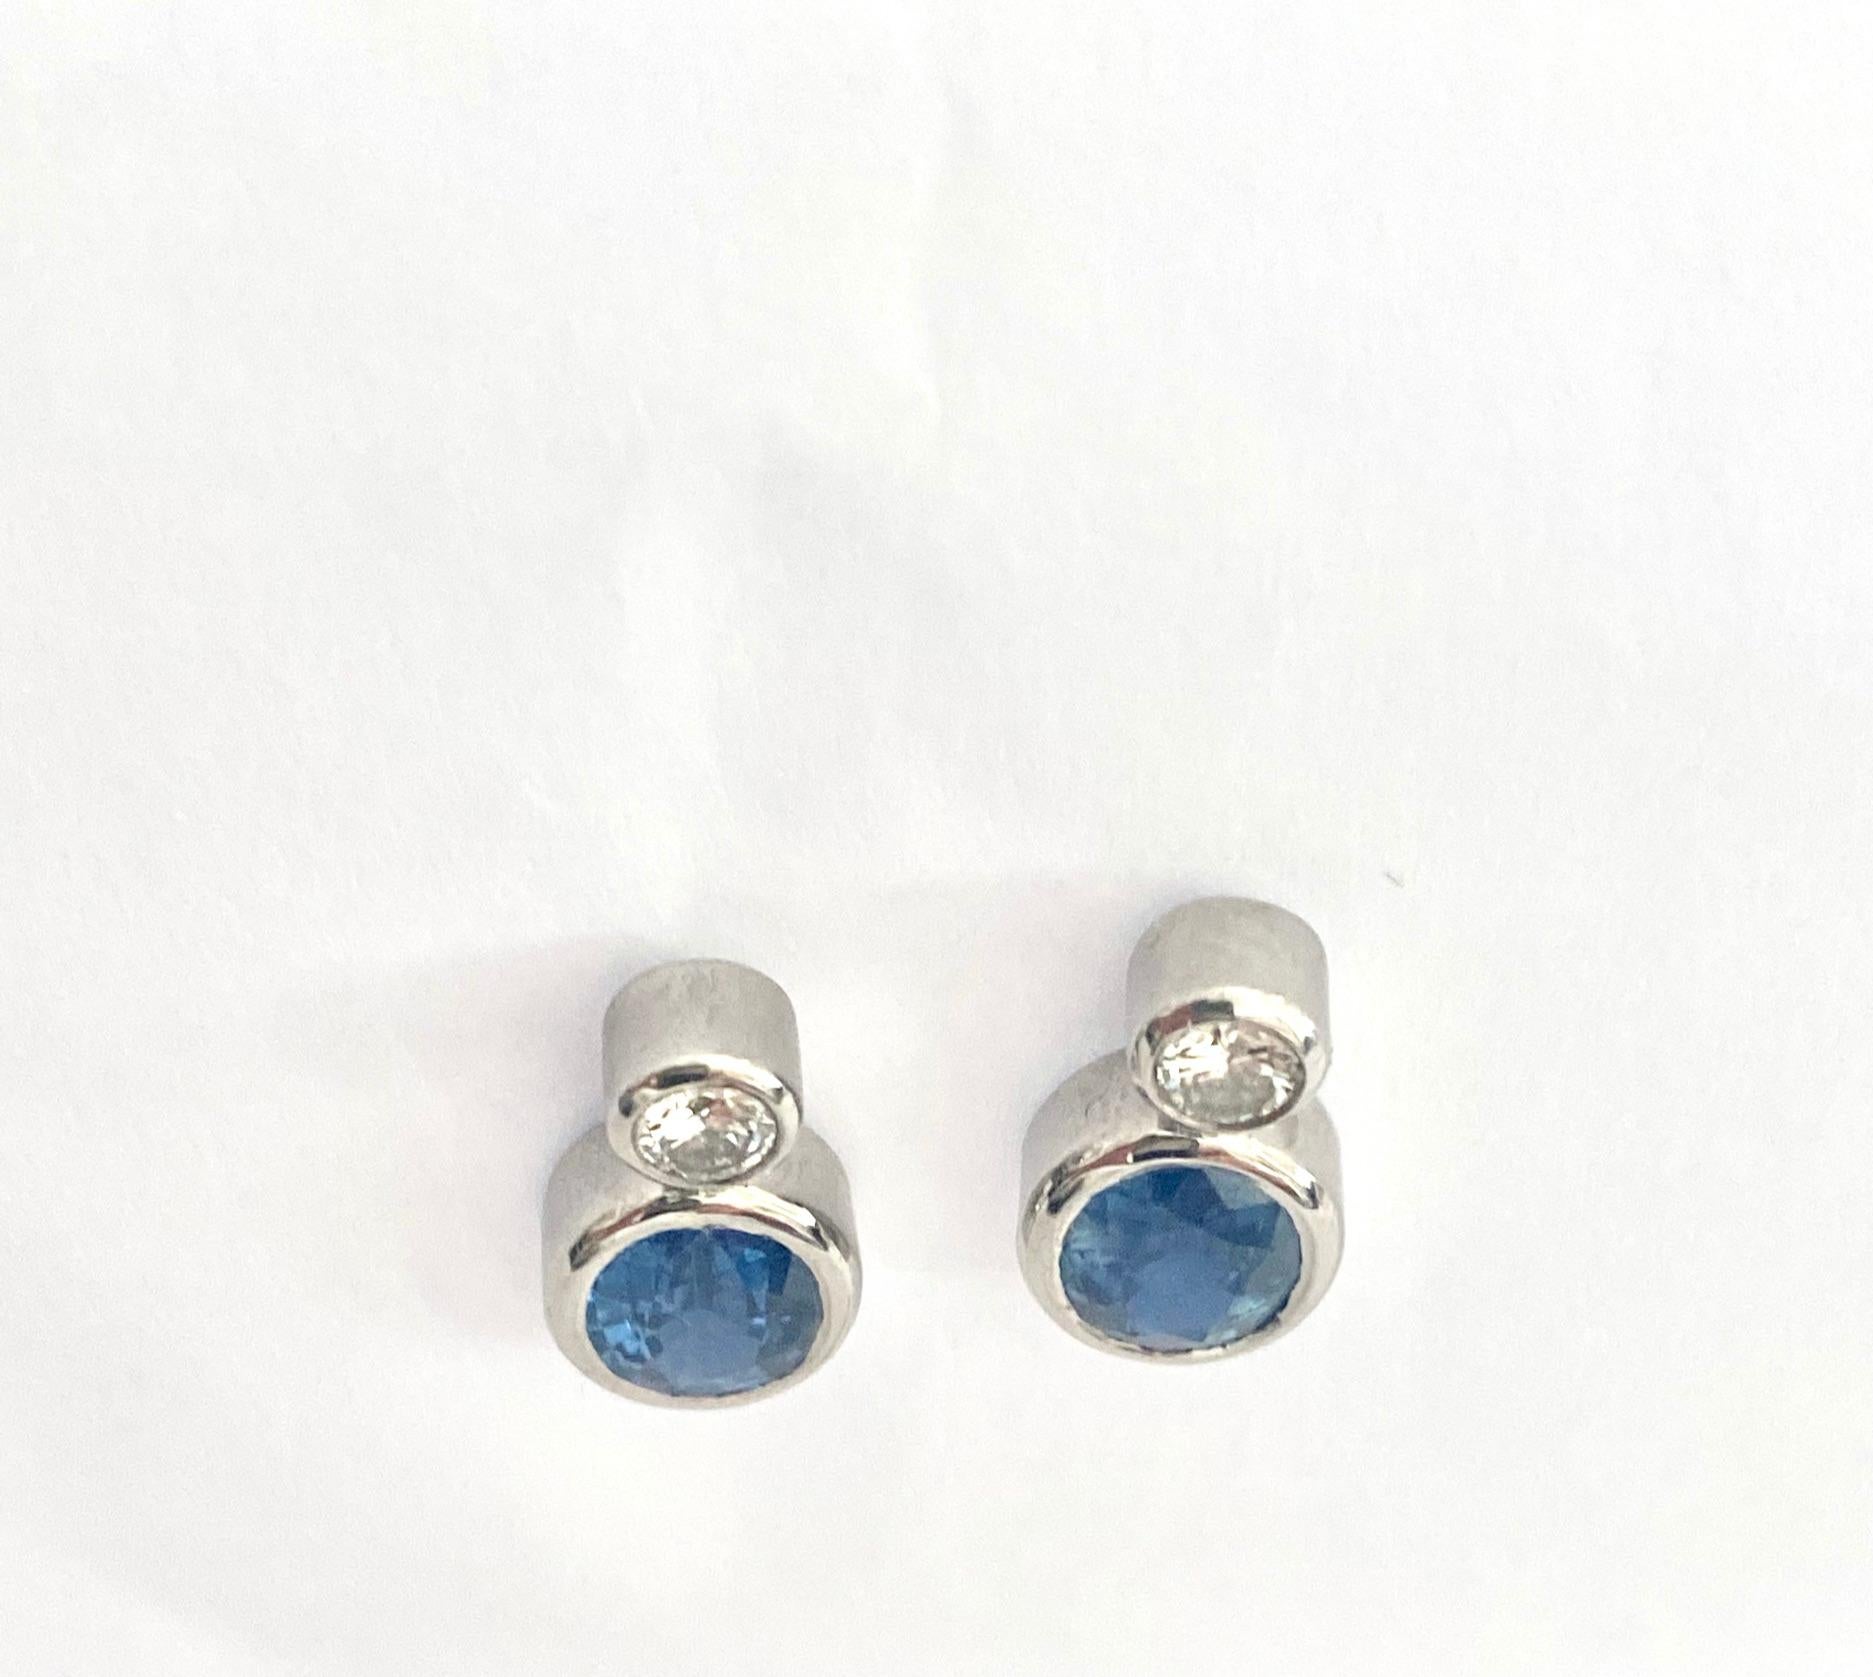 Brilliant Cut White Gold Ear Studs Each with a Sapphire and Brilliant